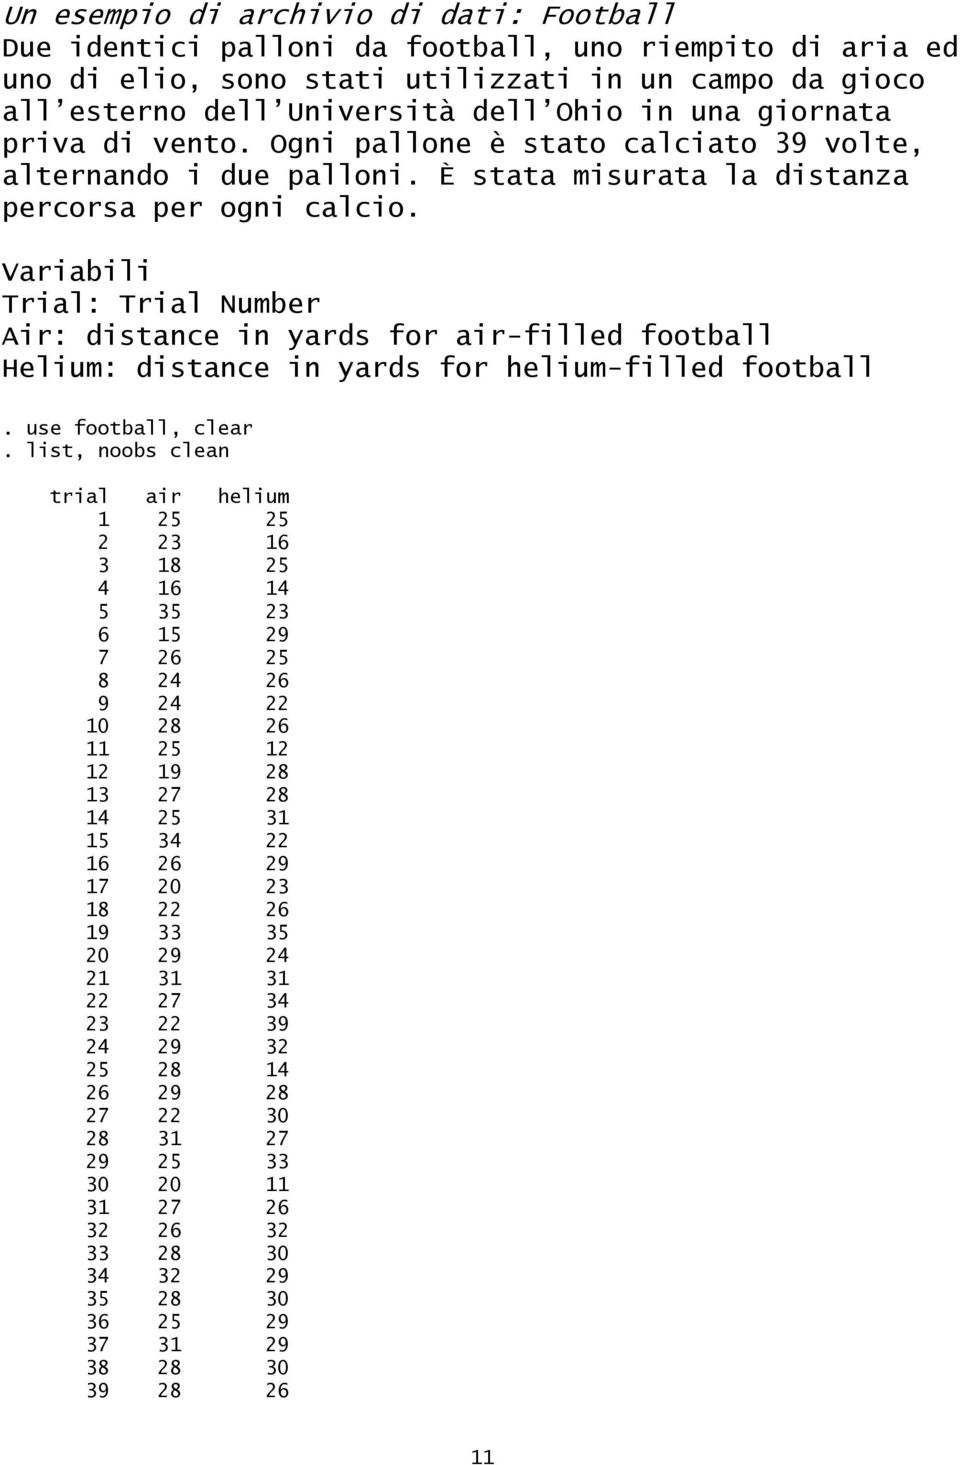 Variabili Trial: Trial Number Air: distance in yards for air-filled football Helium: distance in yards for helium-filled football. use football, clear.